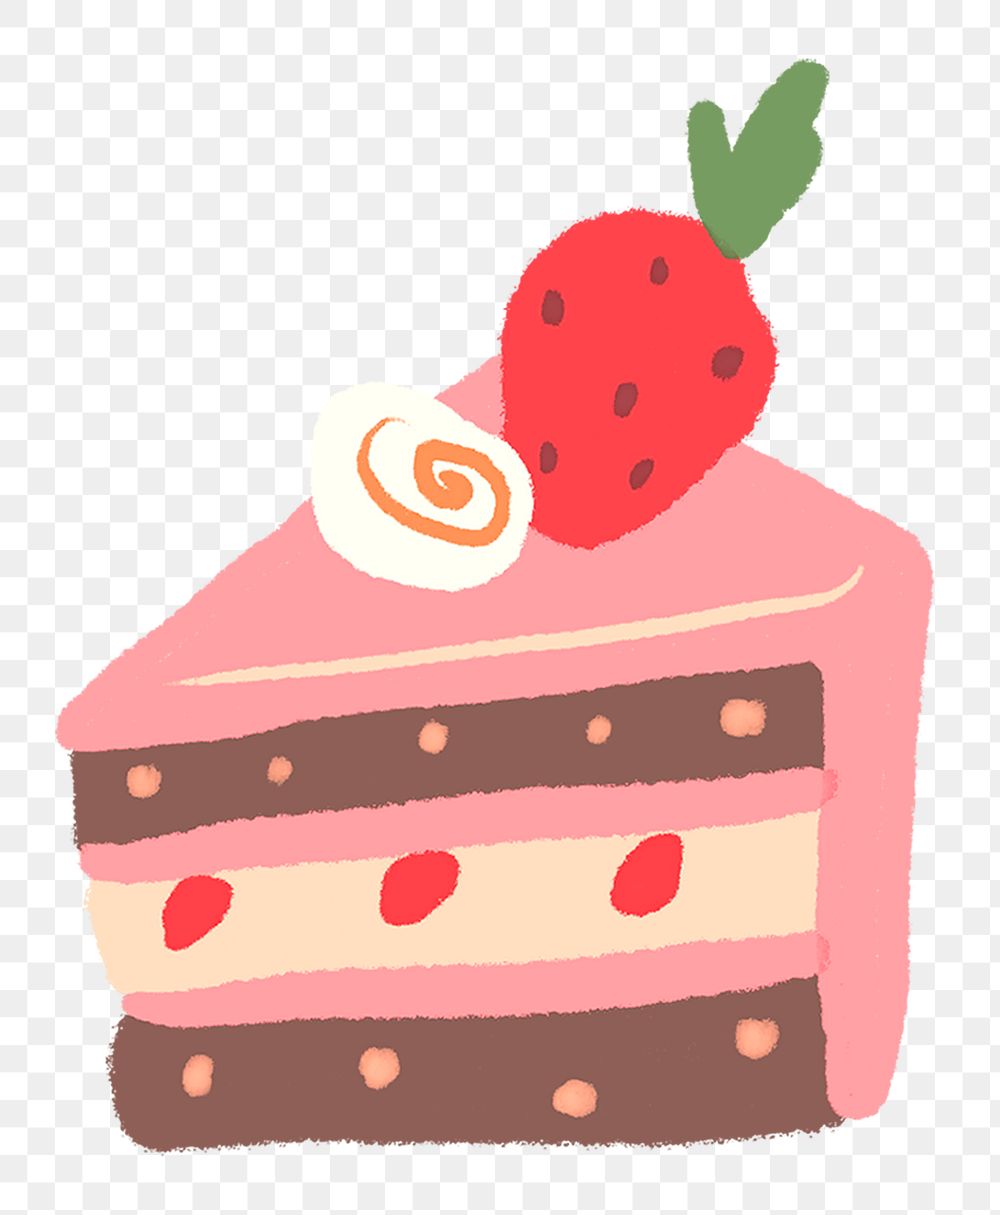 Birthday Cake Cakes Vector Hd Images, Birthday Cake, Birthday Clipart,  Happy Birthday, Creative Birthday Poster PNG Image For Free Download |  Birthday cake bakery, Cake, Free birthday stuff